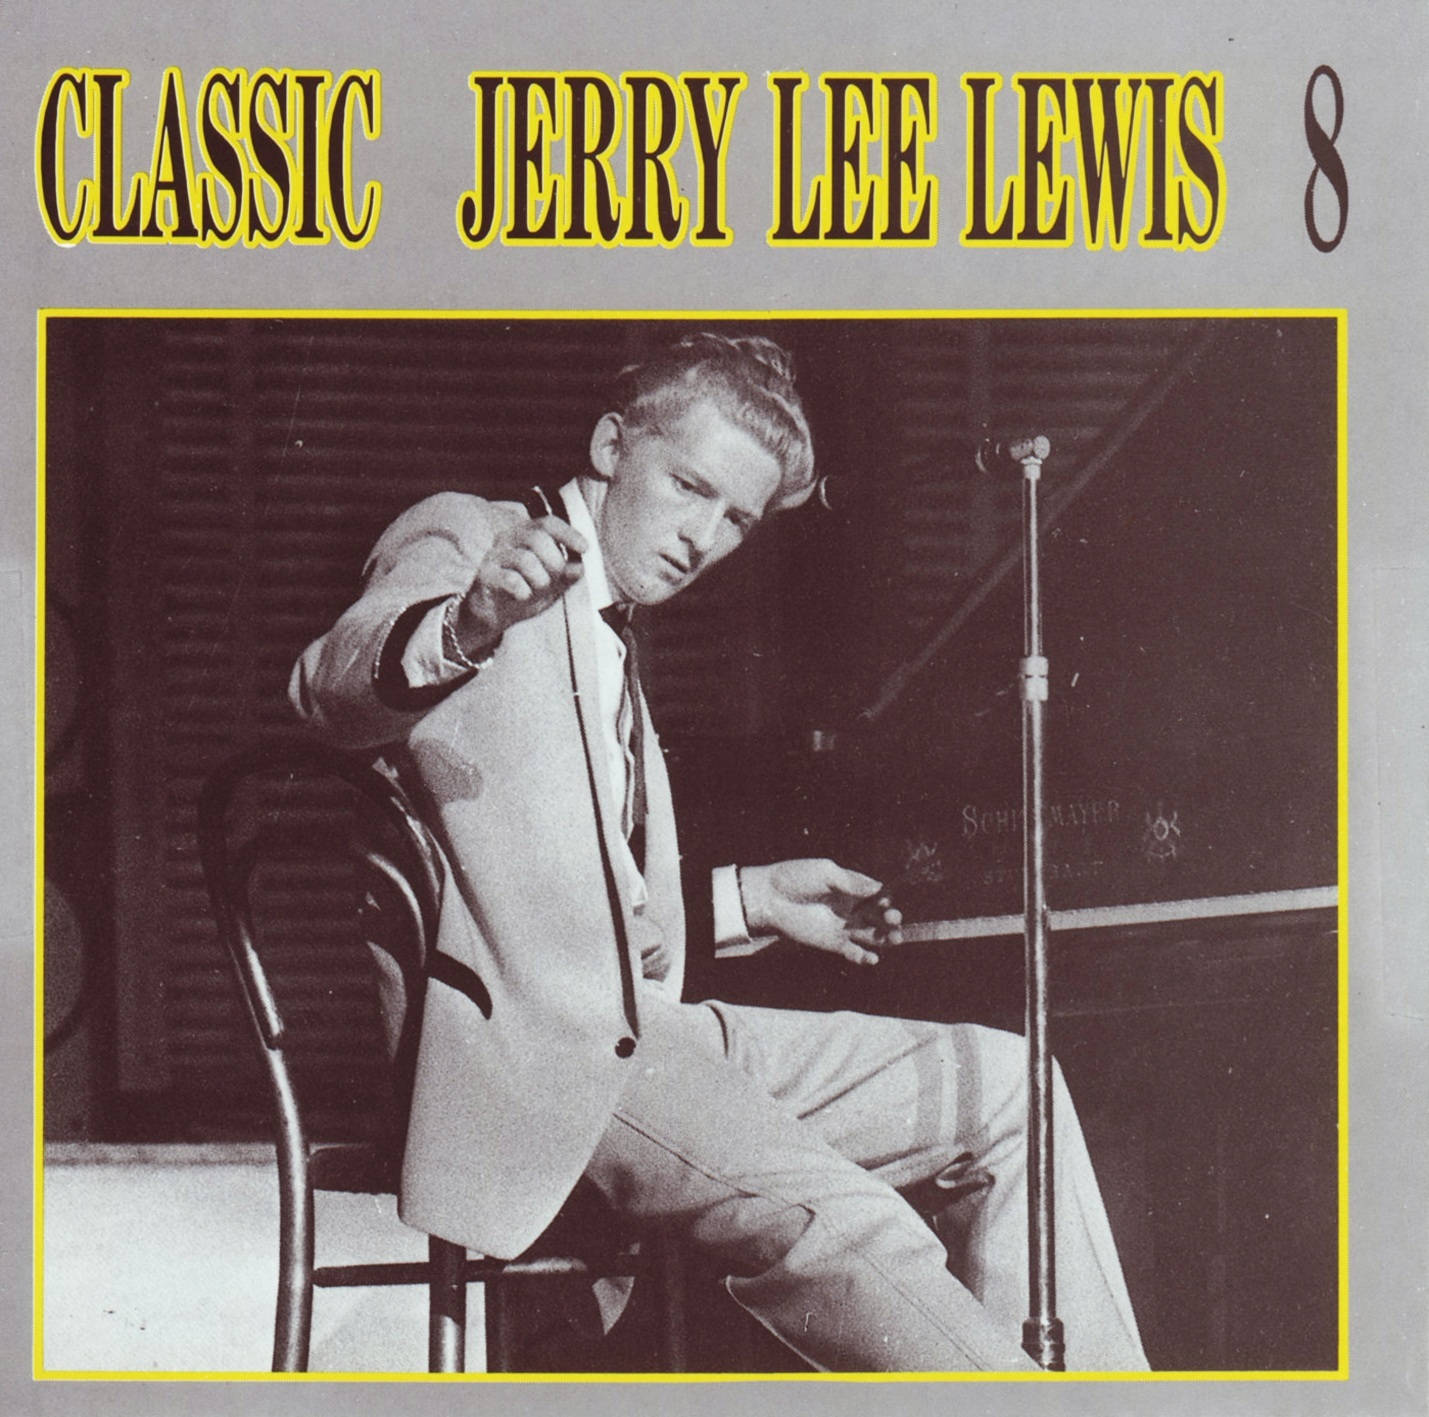 The Legendary Jerry Lee Lewis In His Prime Wallpaper